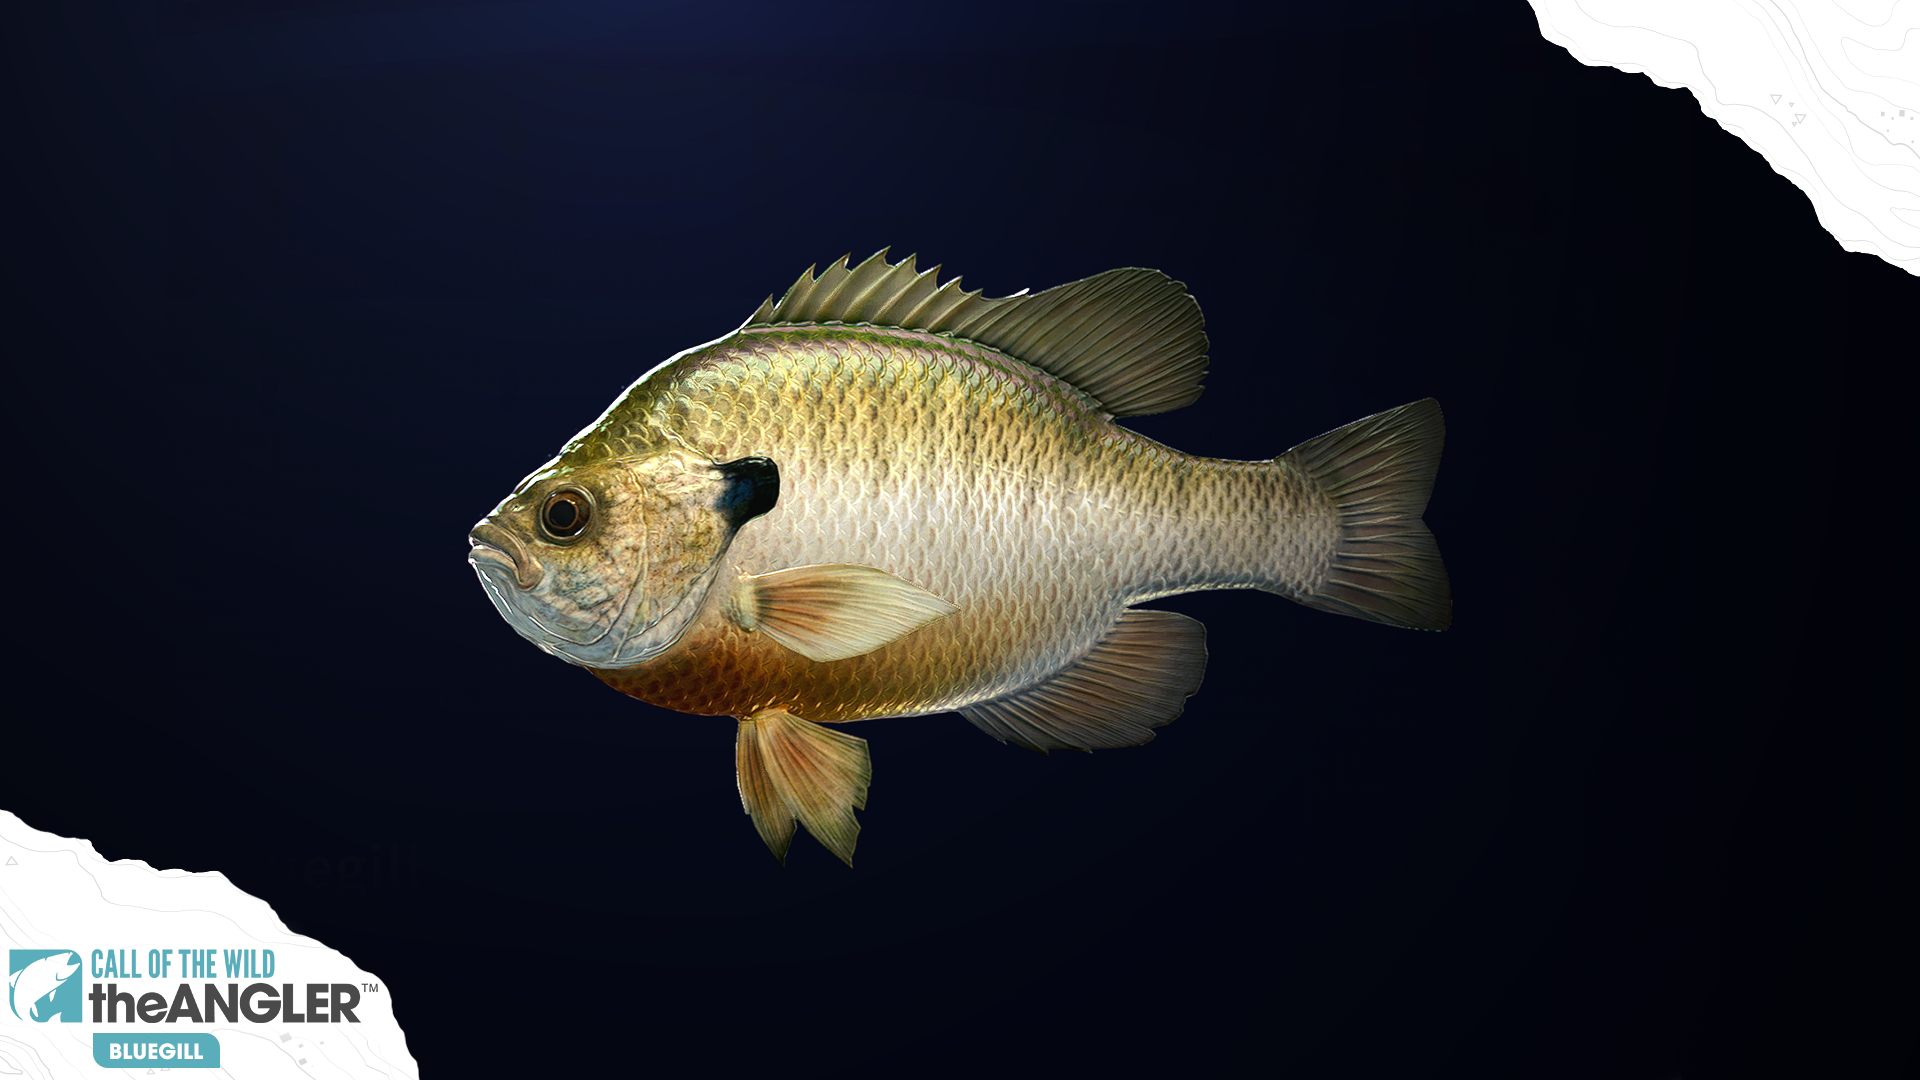 An image of the fish species, Bluegill.